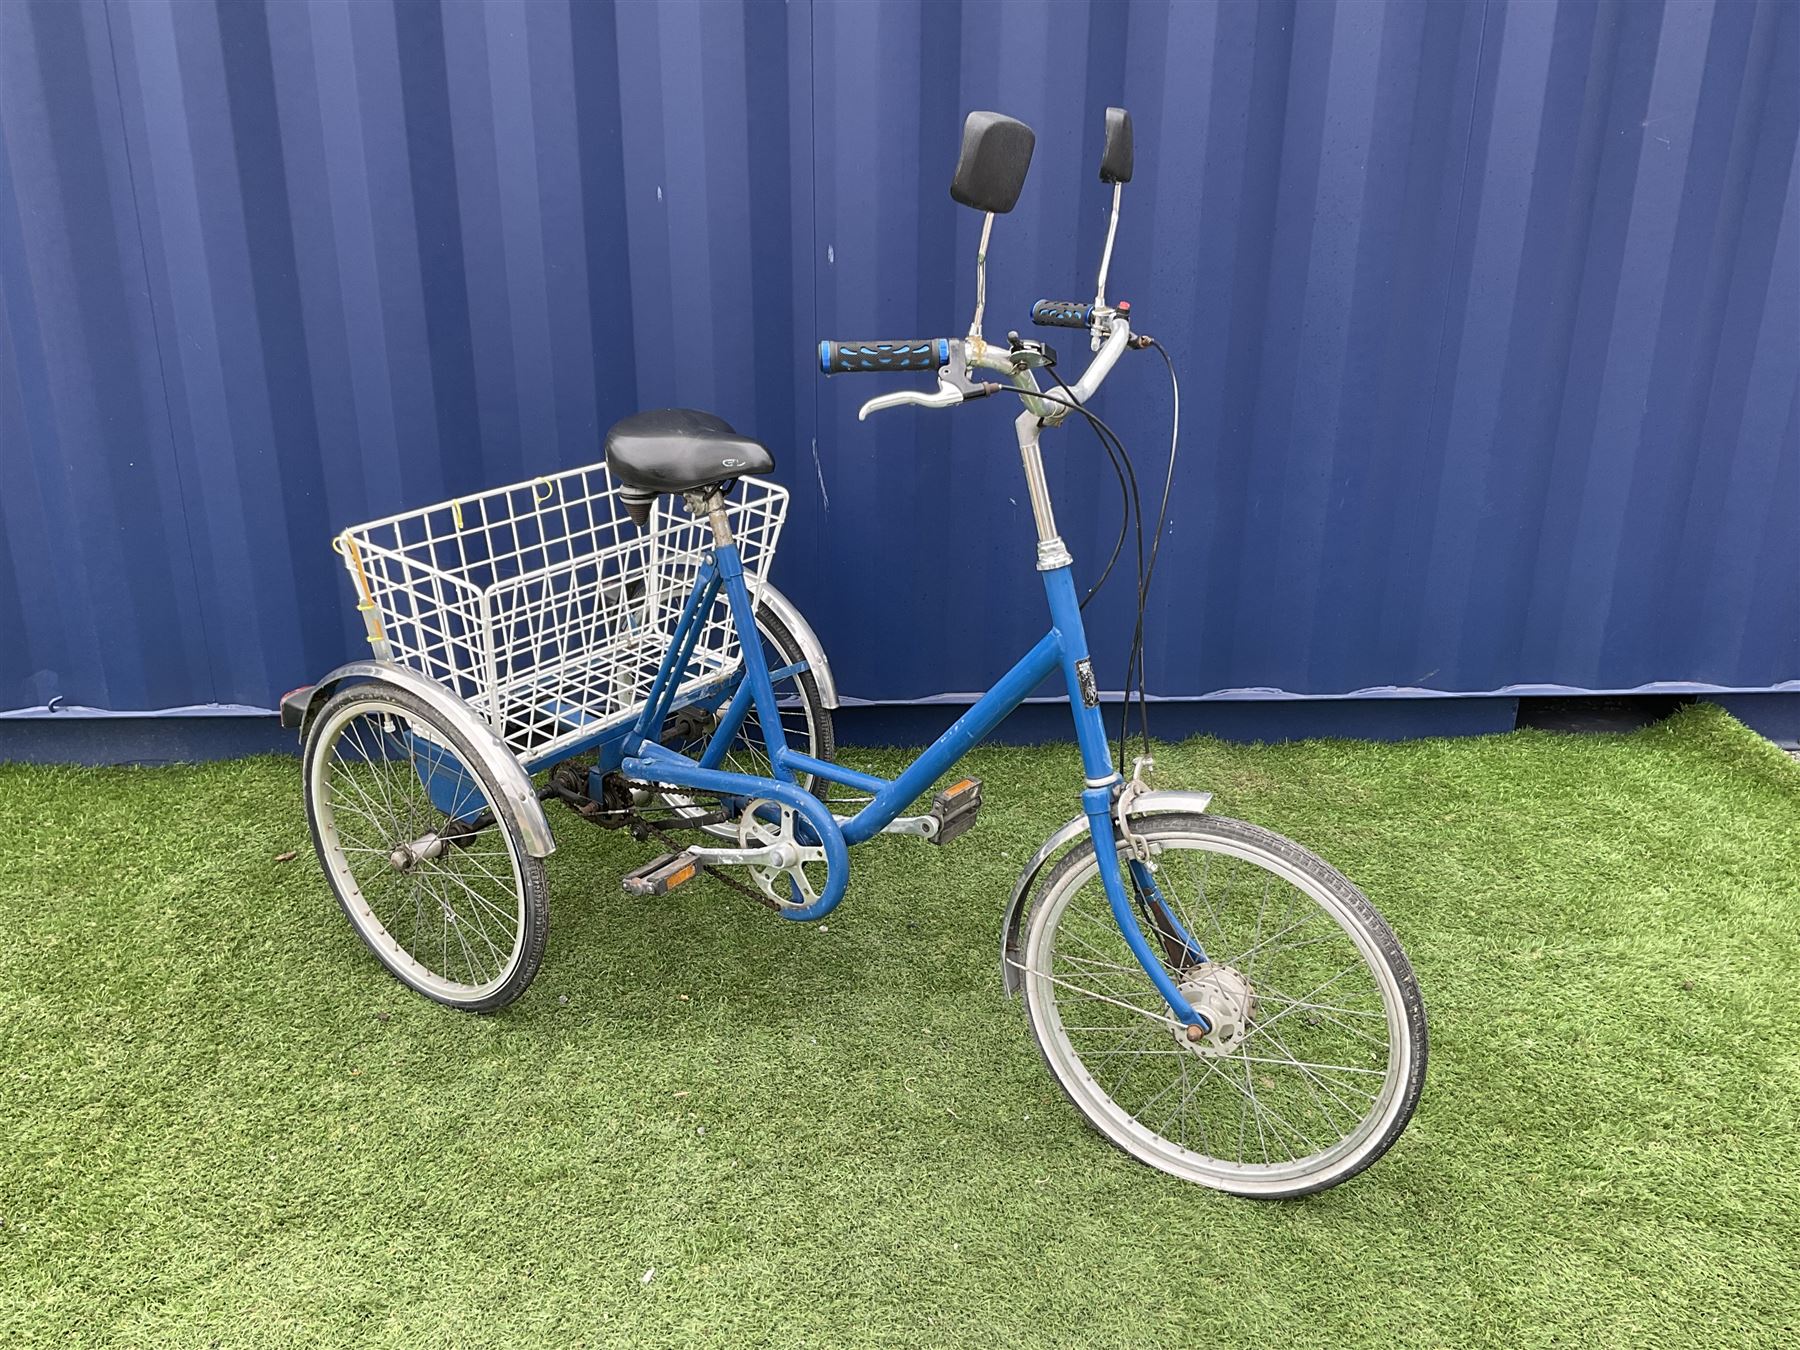 Pashley single speed tricycle with basket